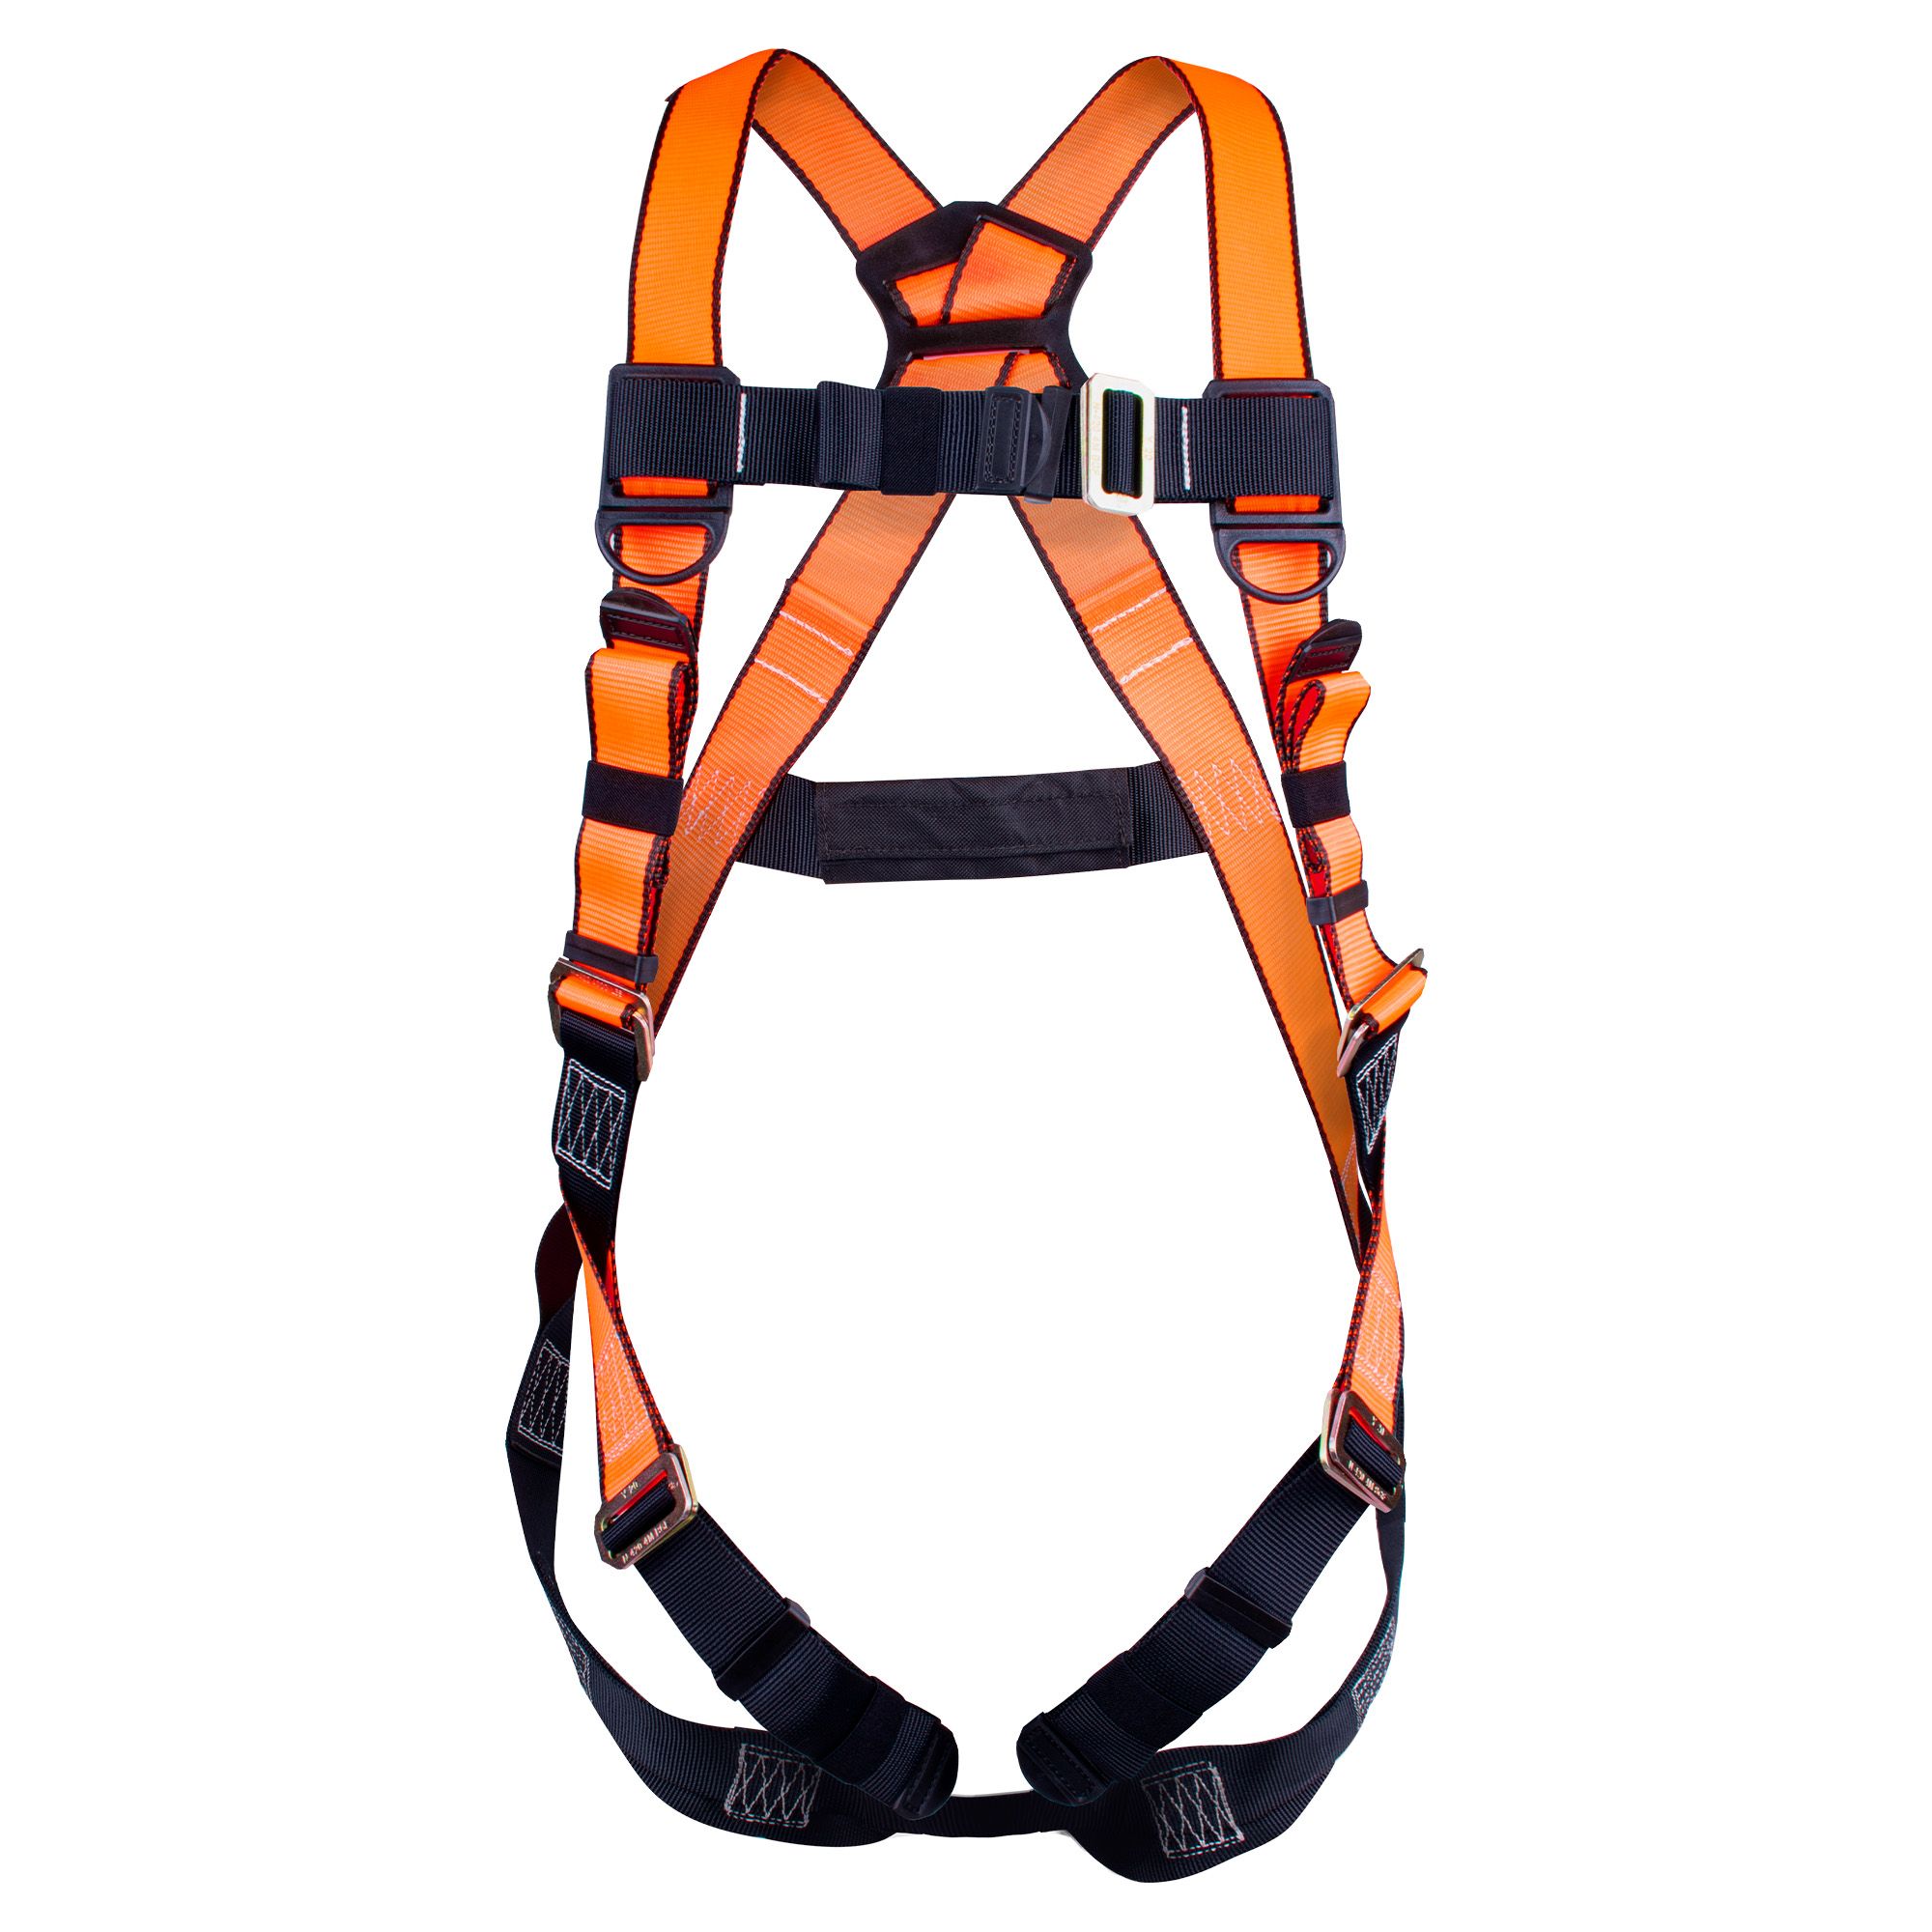 H SERIES™ 5-Point Adjustable Universal Fit Safety Harness